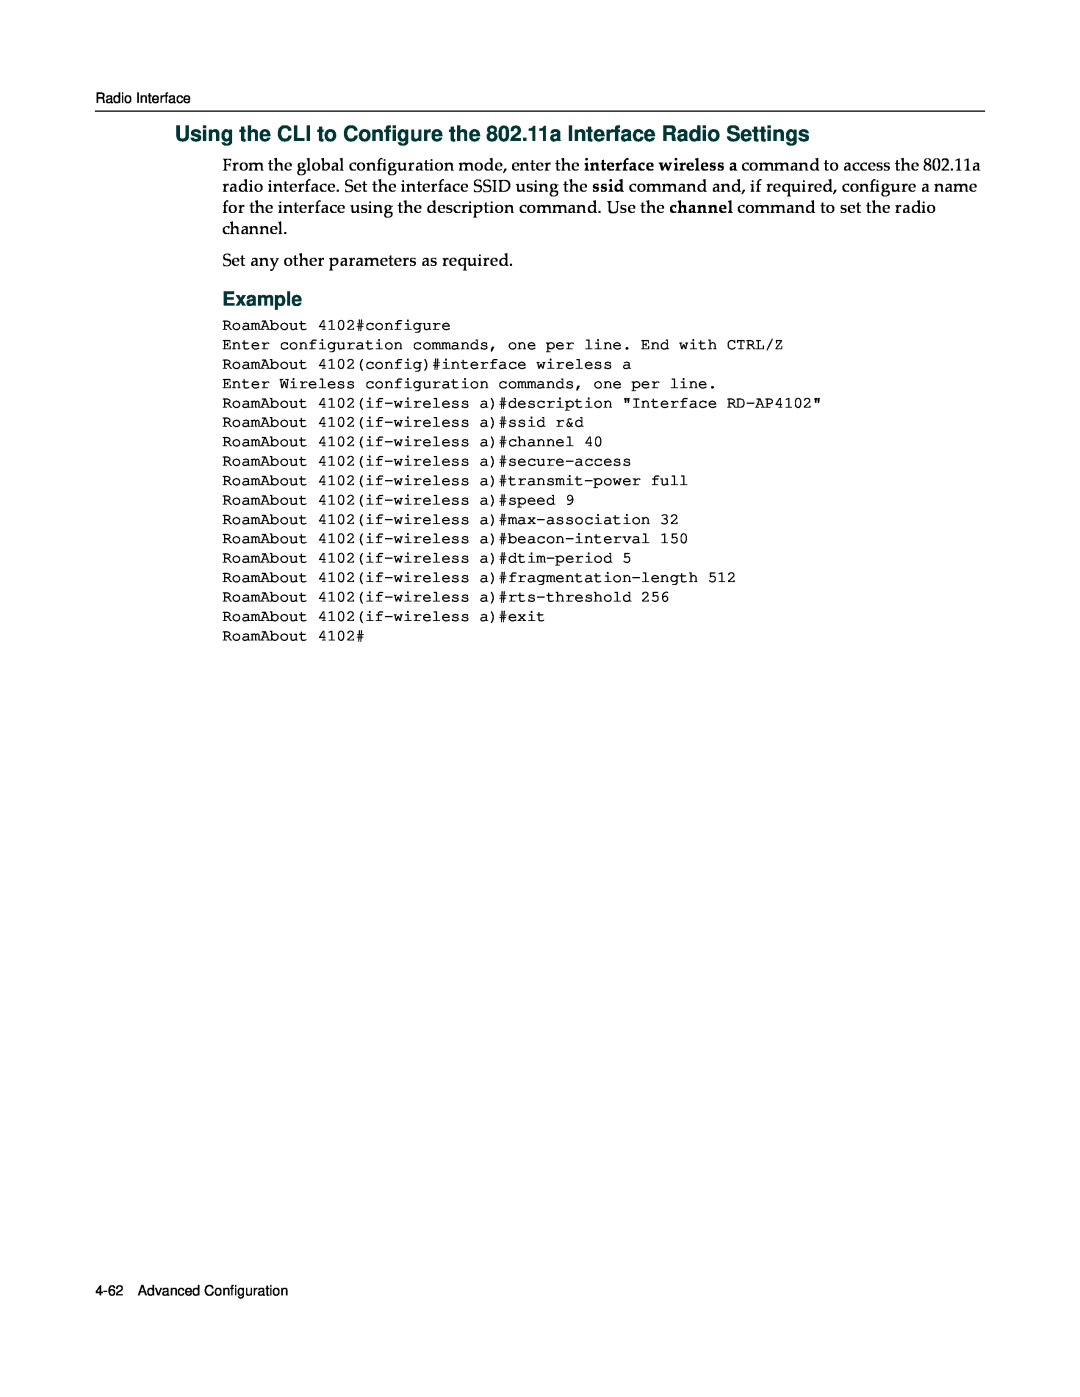 Enterasys Networks RBT-4102 manual Using the CLI to Configure the 802.11a Interface Radio Settings, Example 